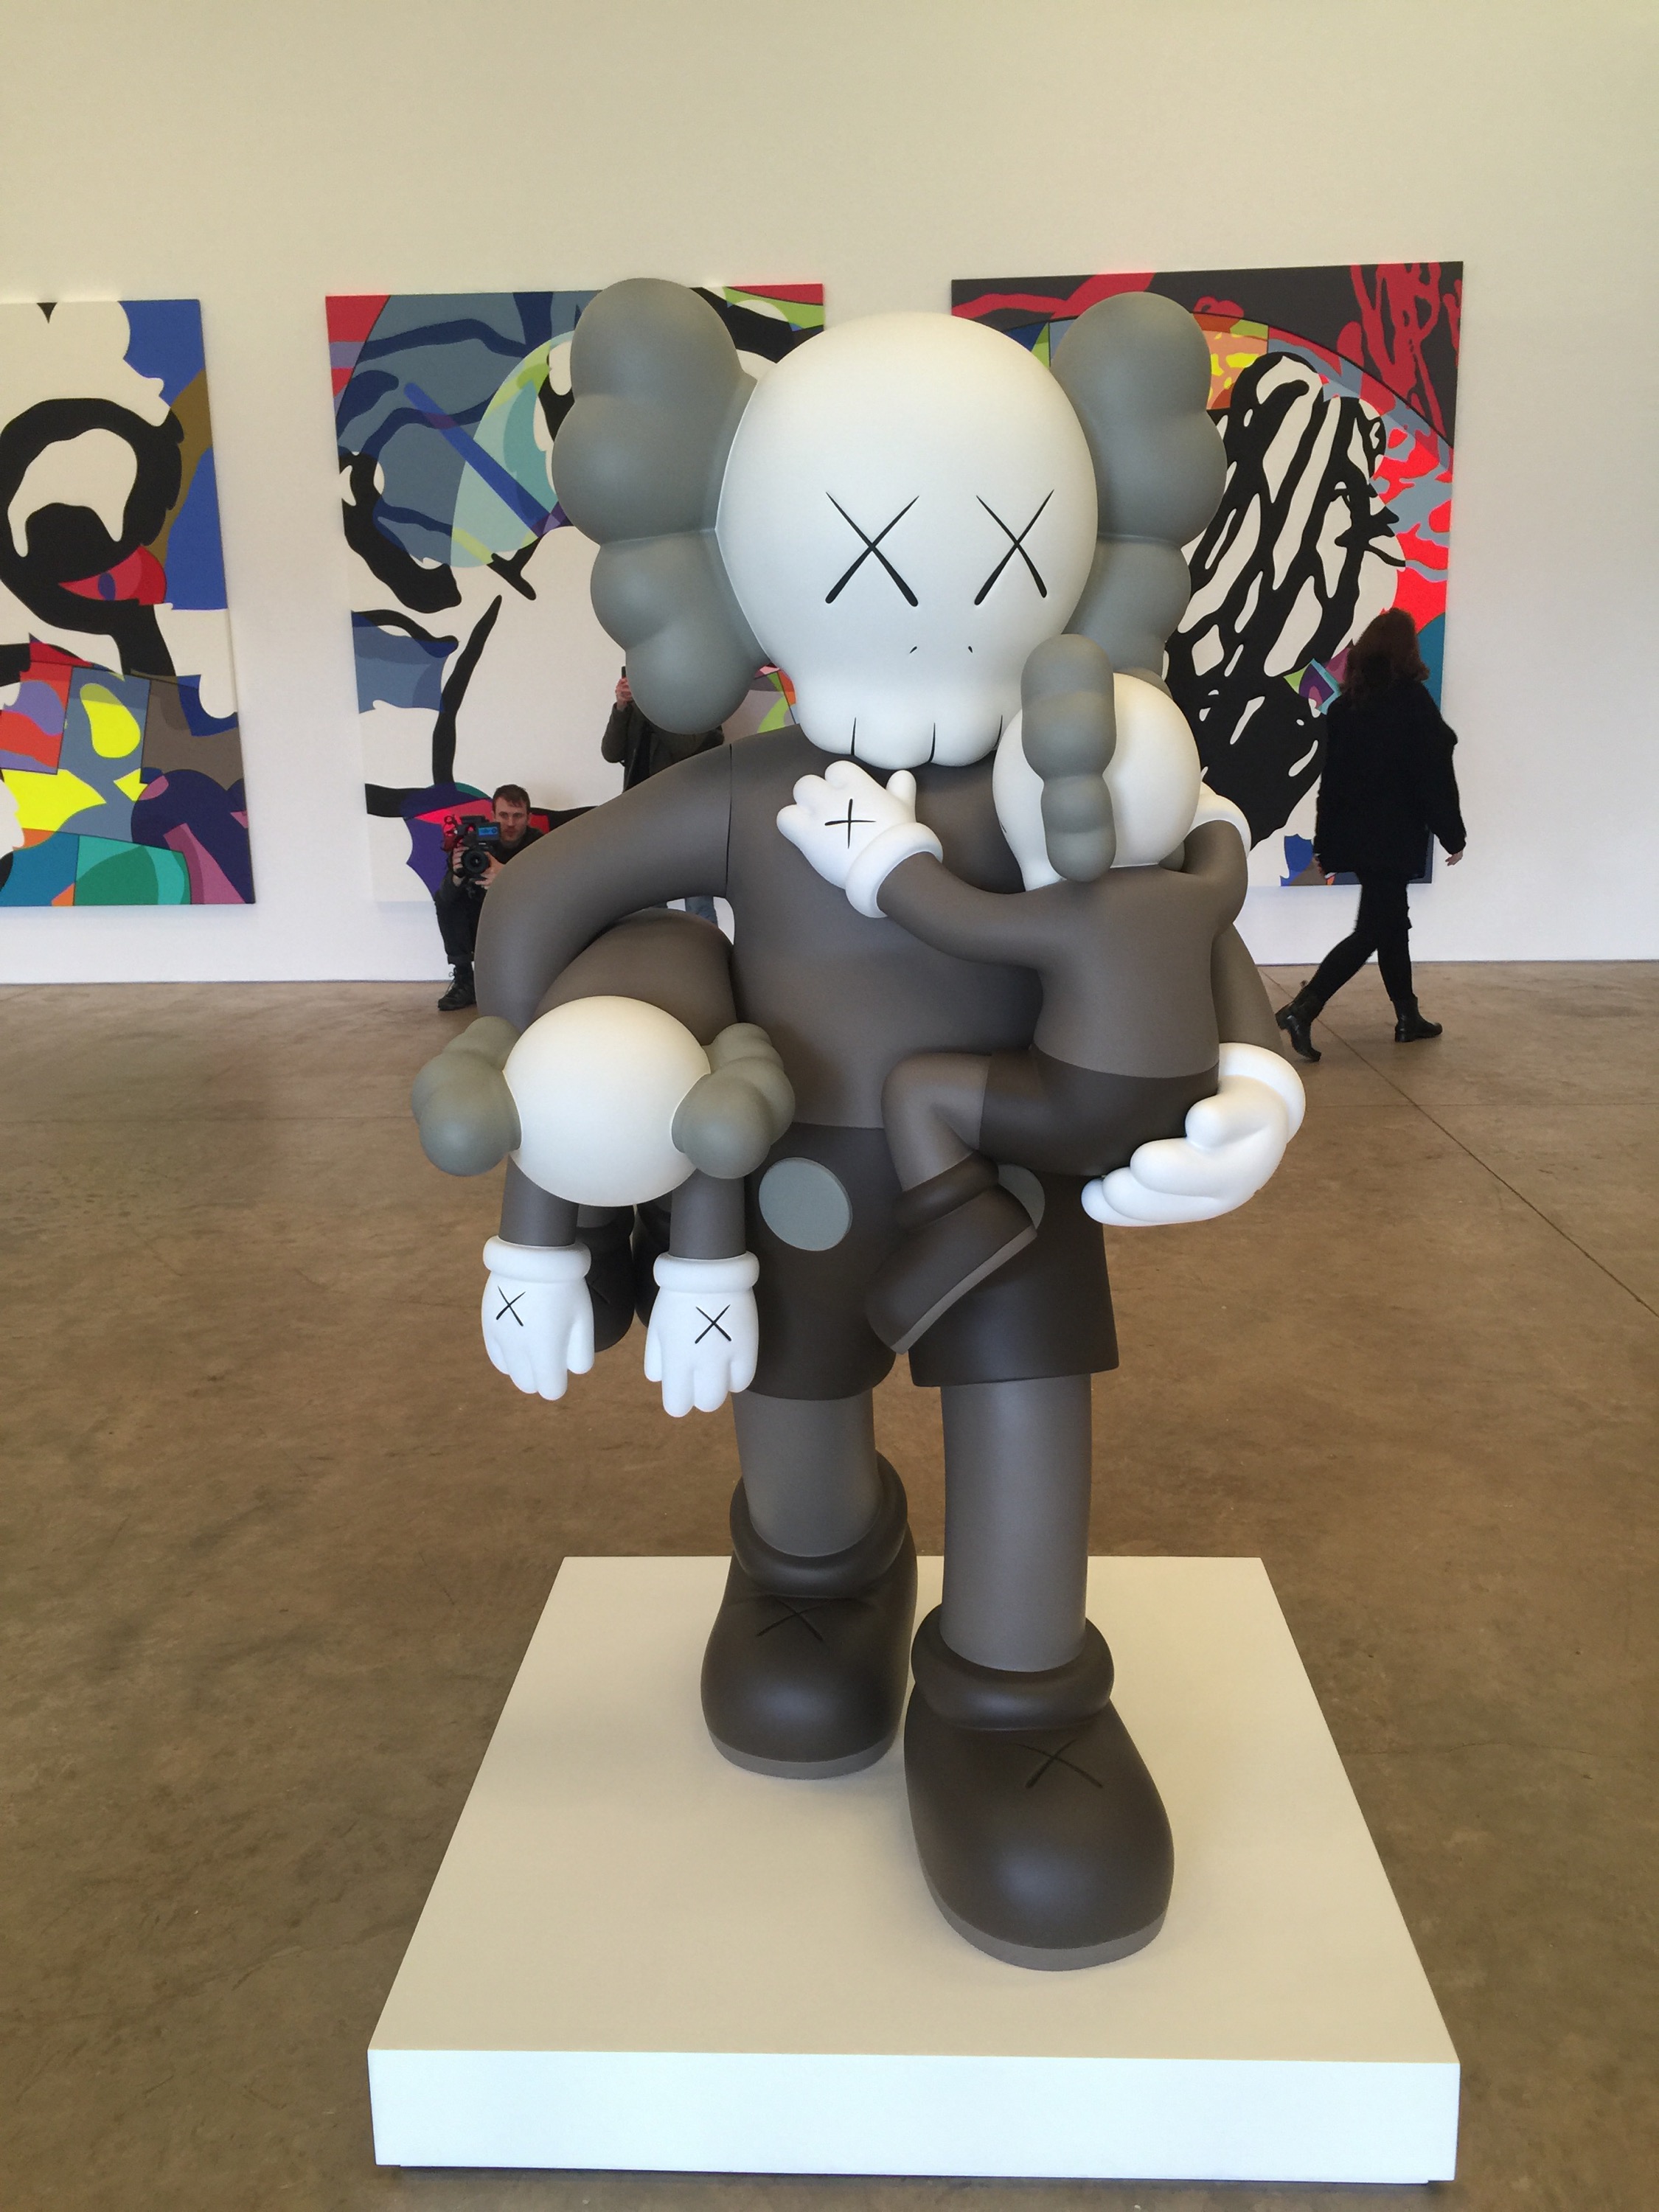 Kaws Big Shiny Toys In The Yorkshire